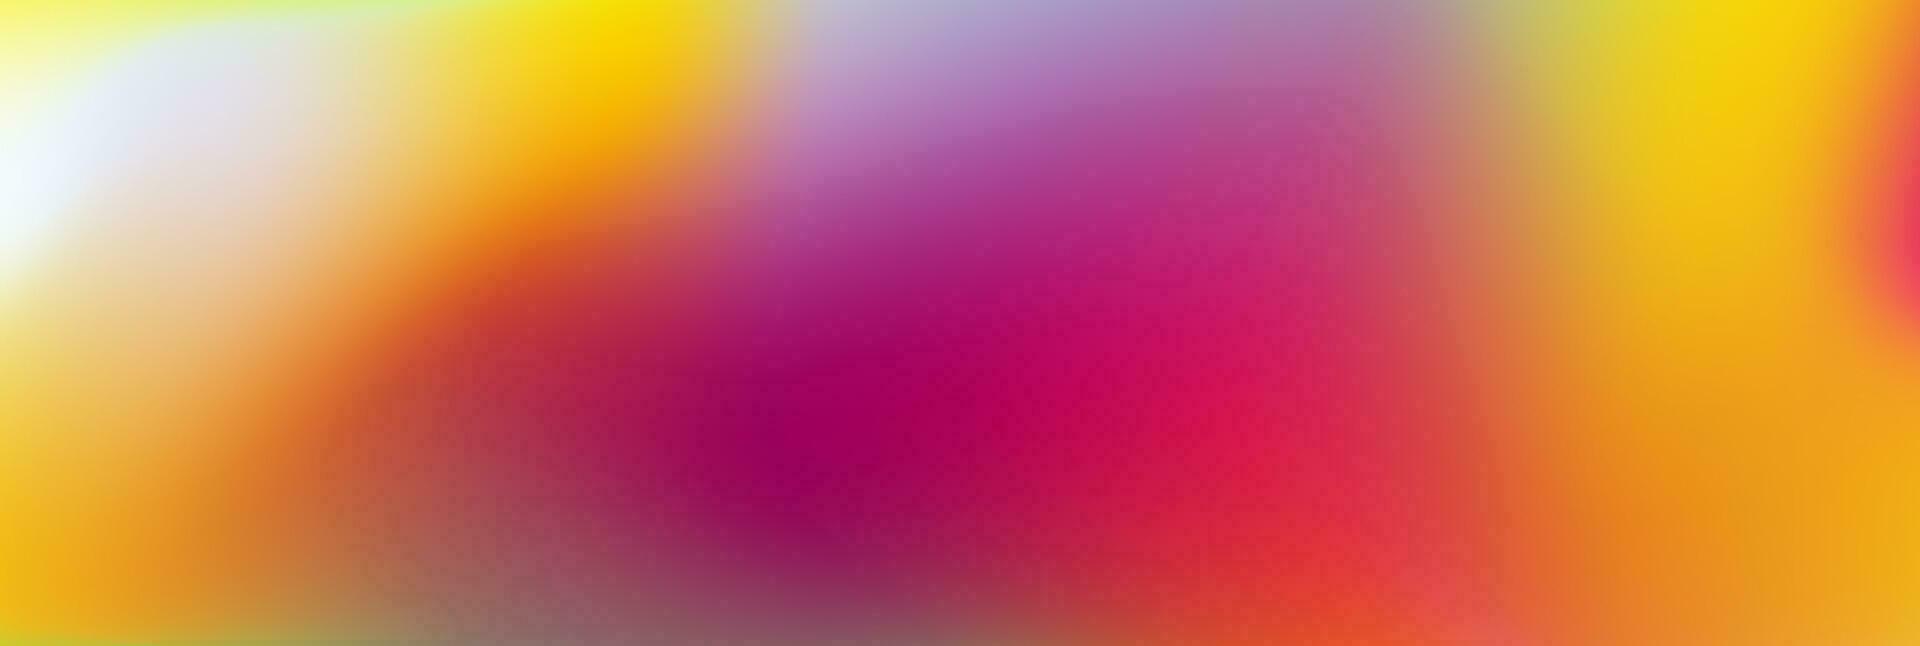 Abstract colorful soft gradient pastel banner vector